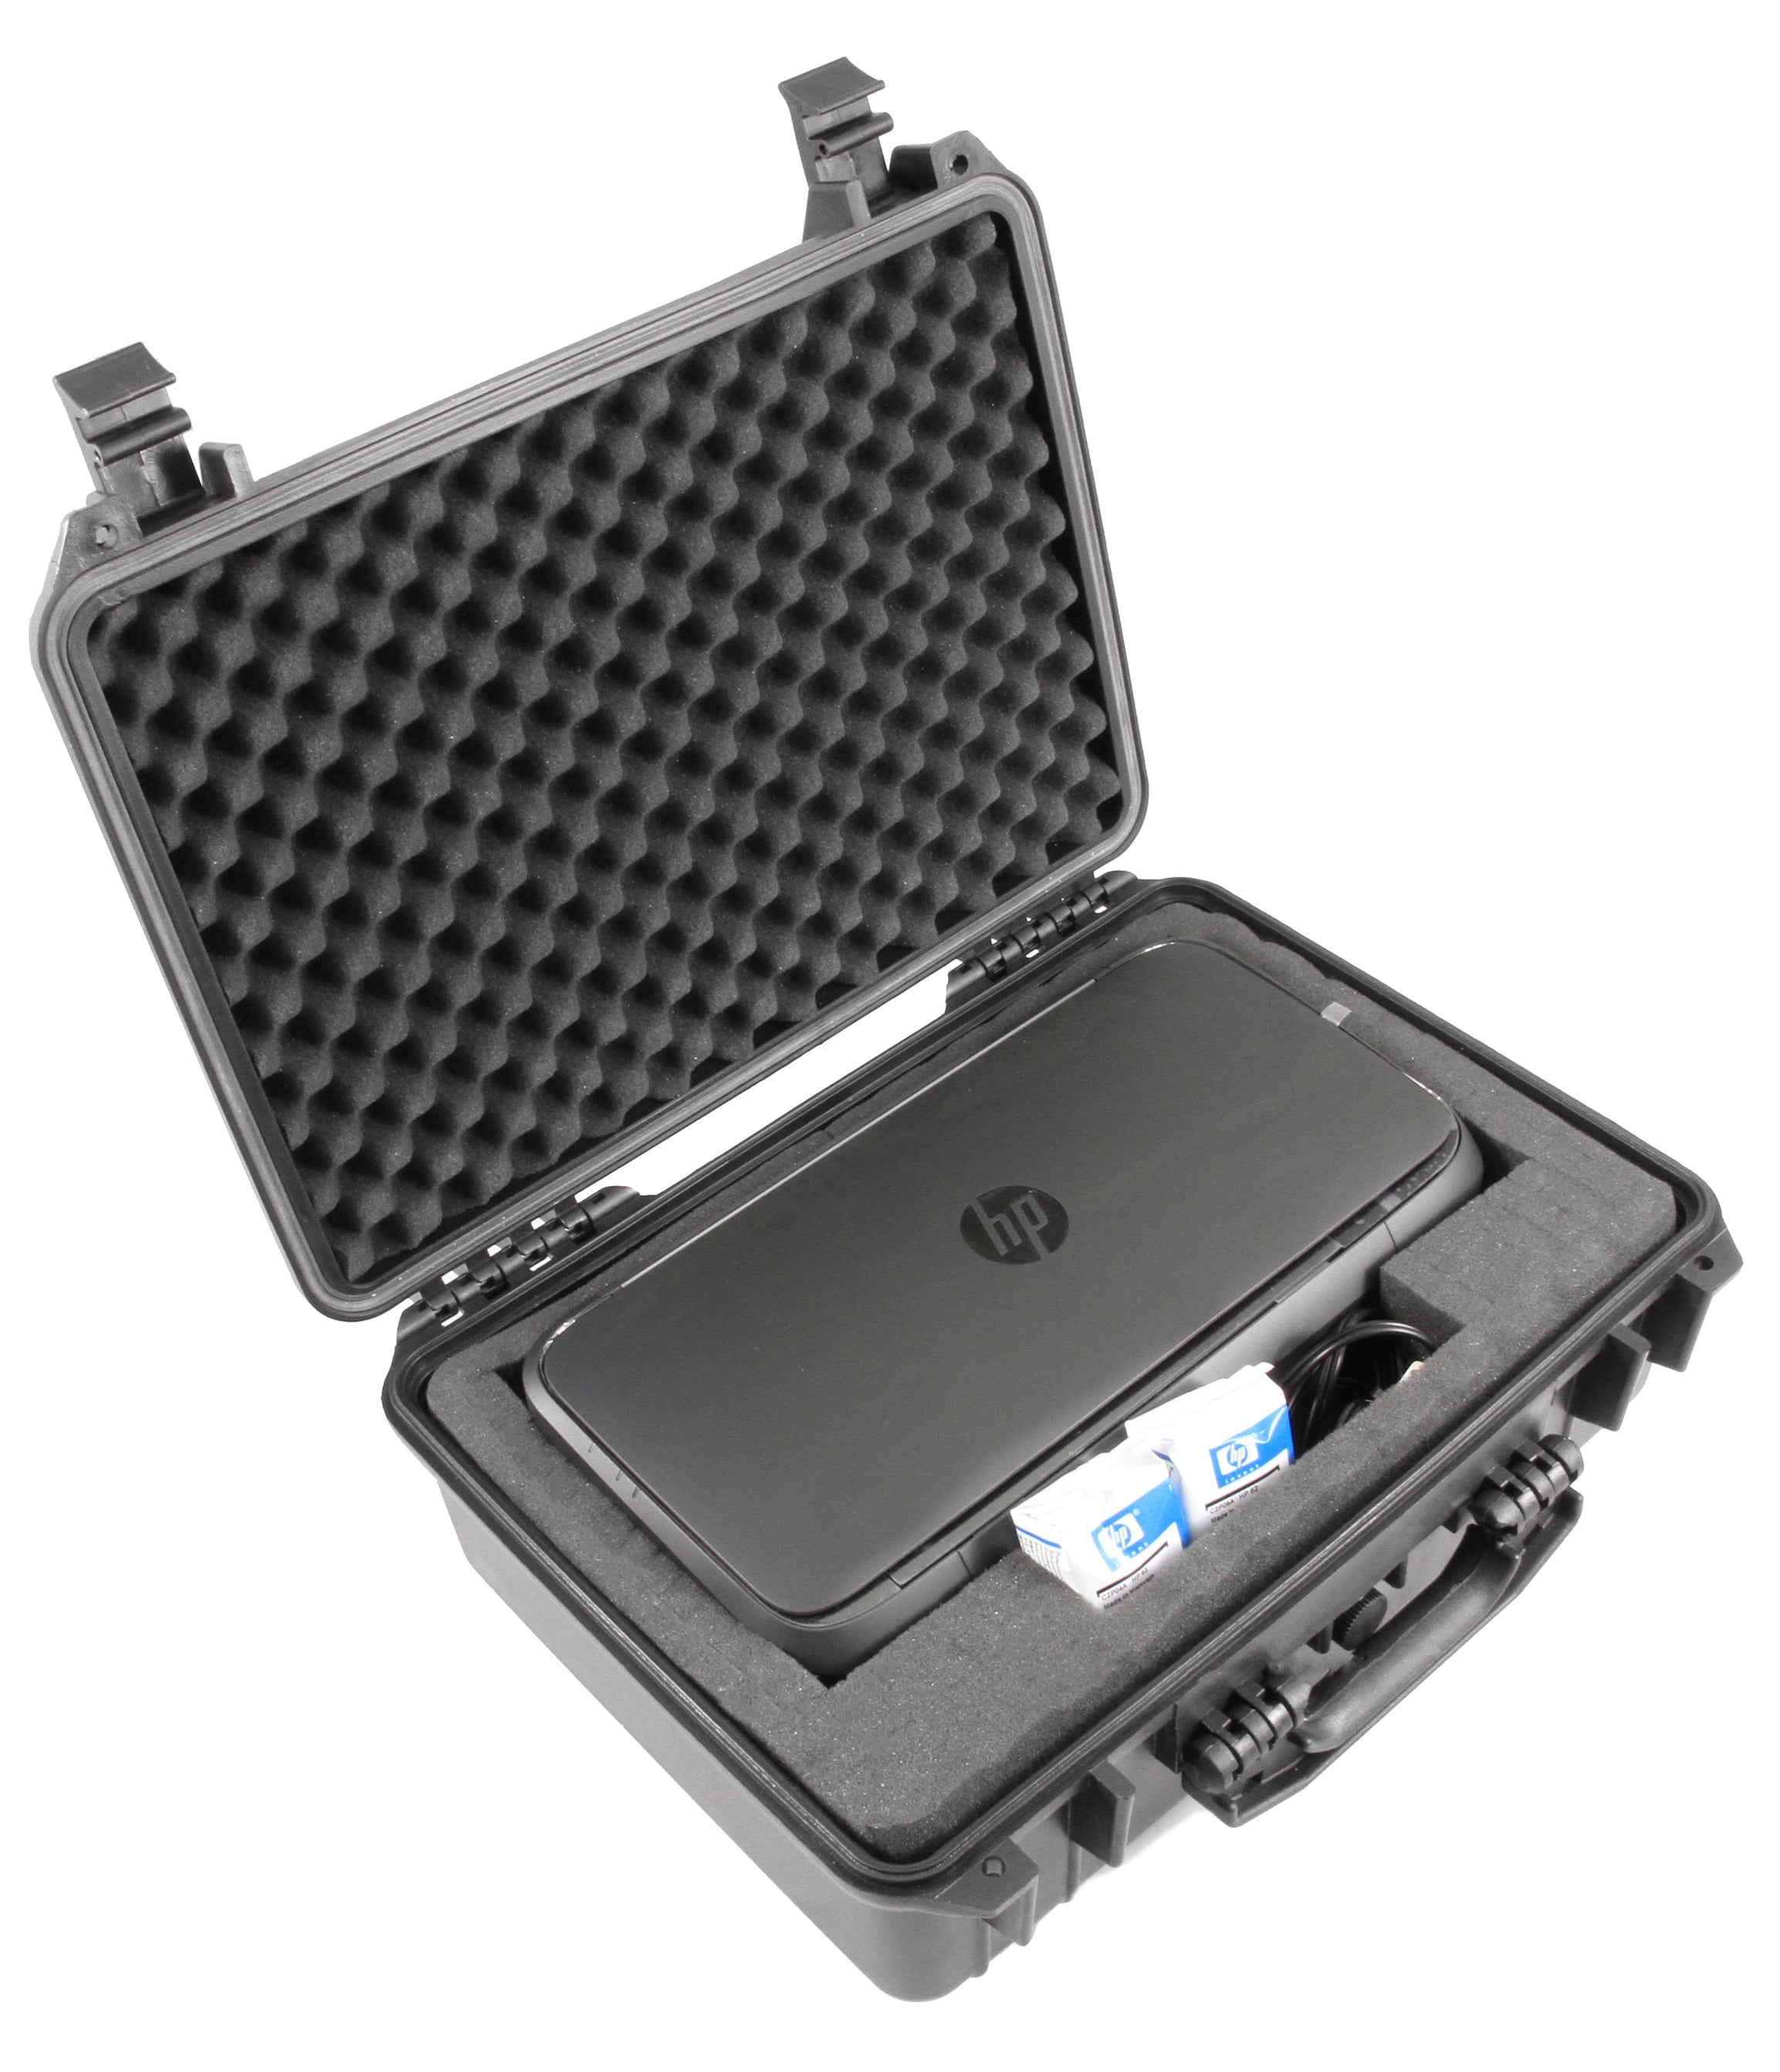 Waterproof Portable Printer Carry Case fits HP Officejet 250 Mobile All-in-One Printer and Accessories, Includes Case Only by Casematix